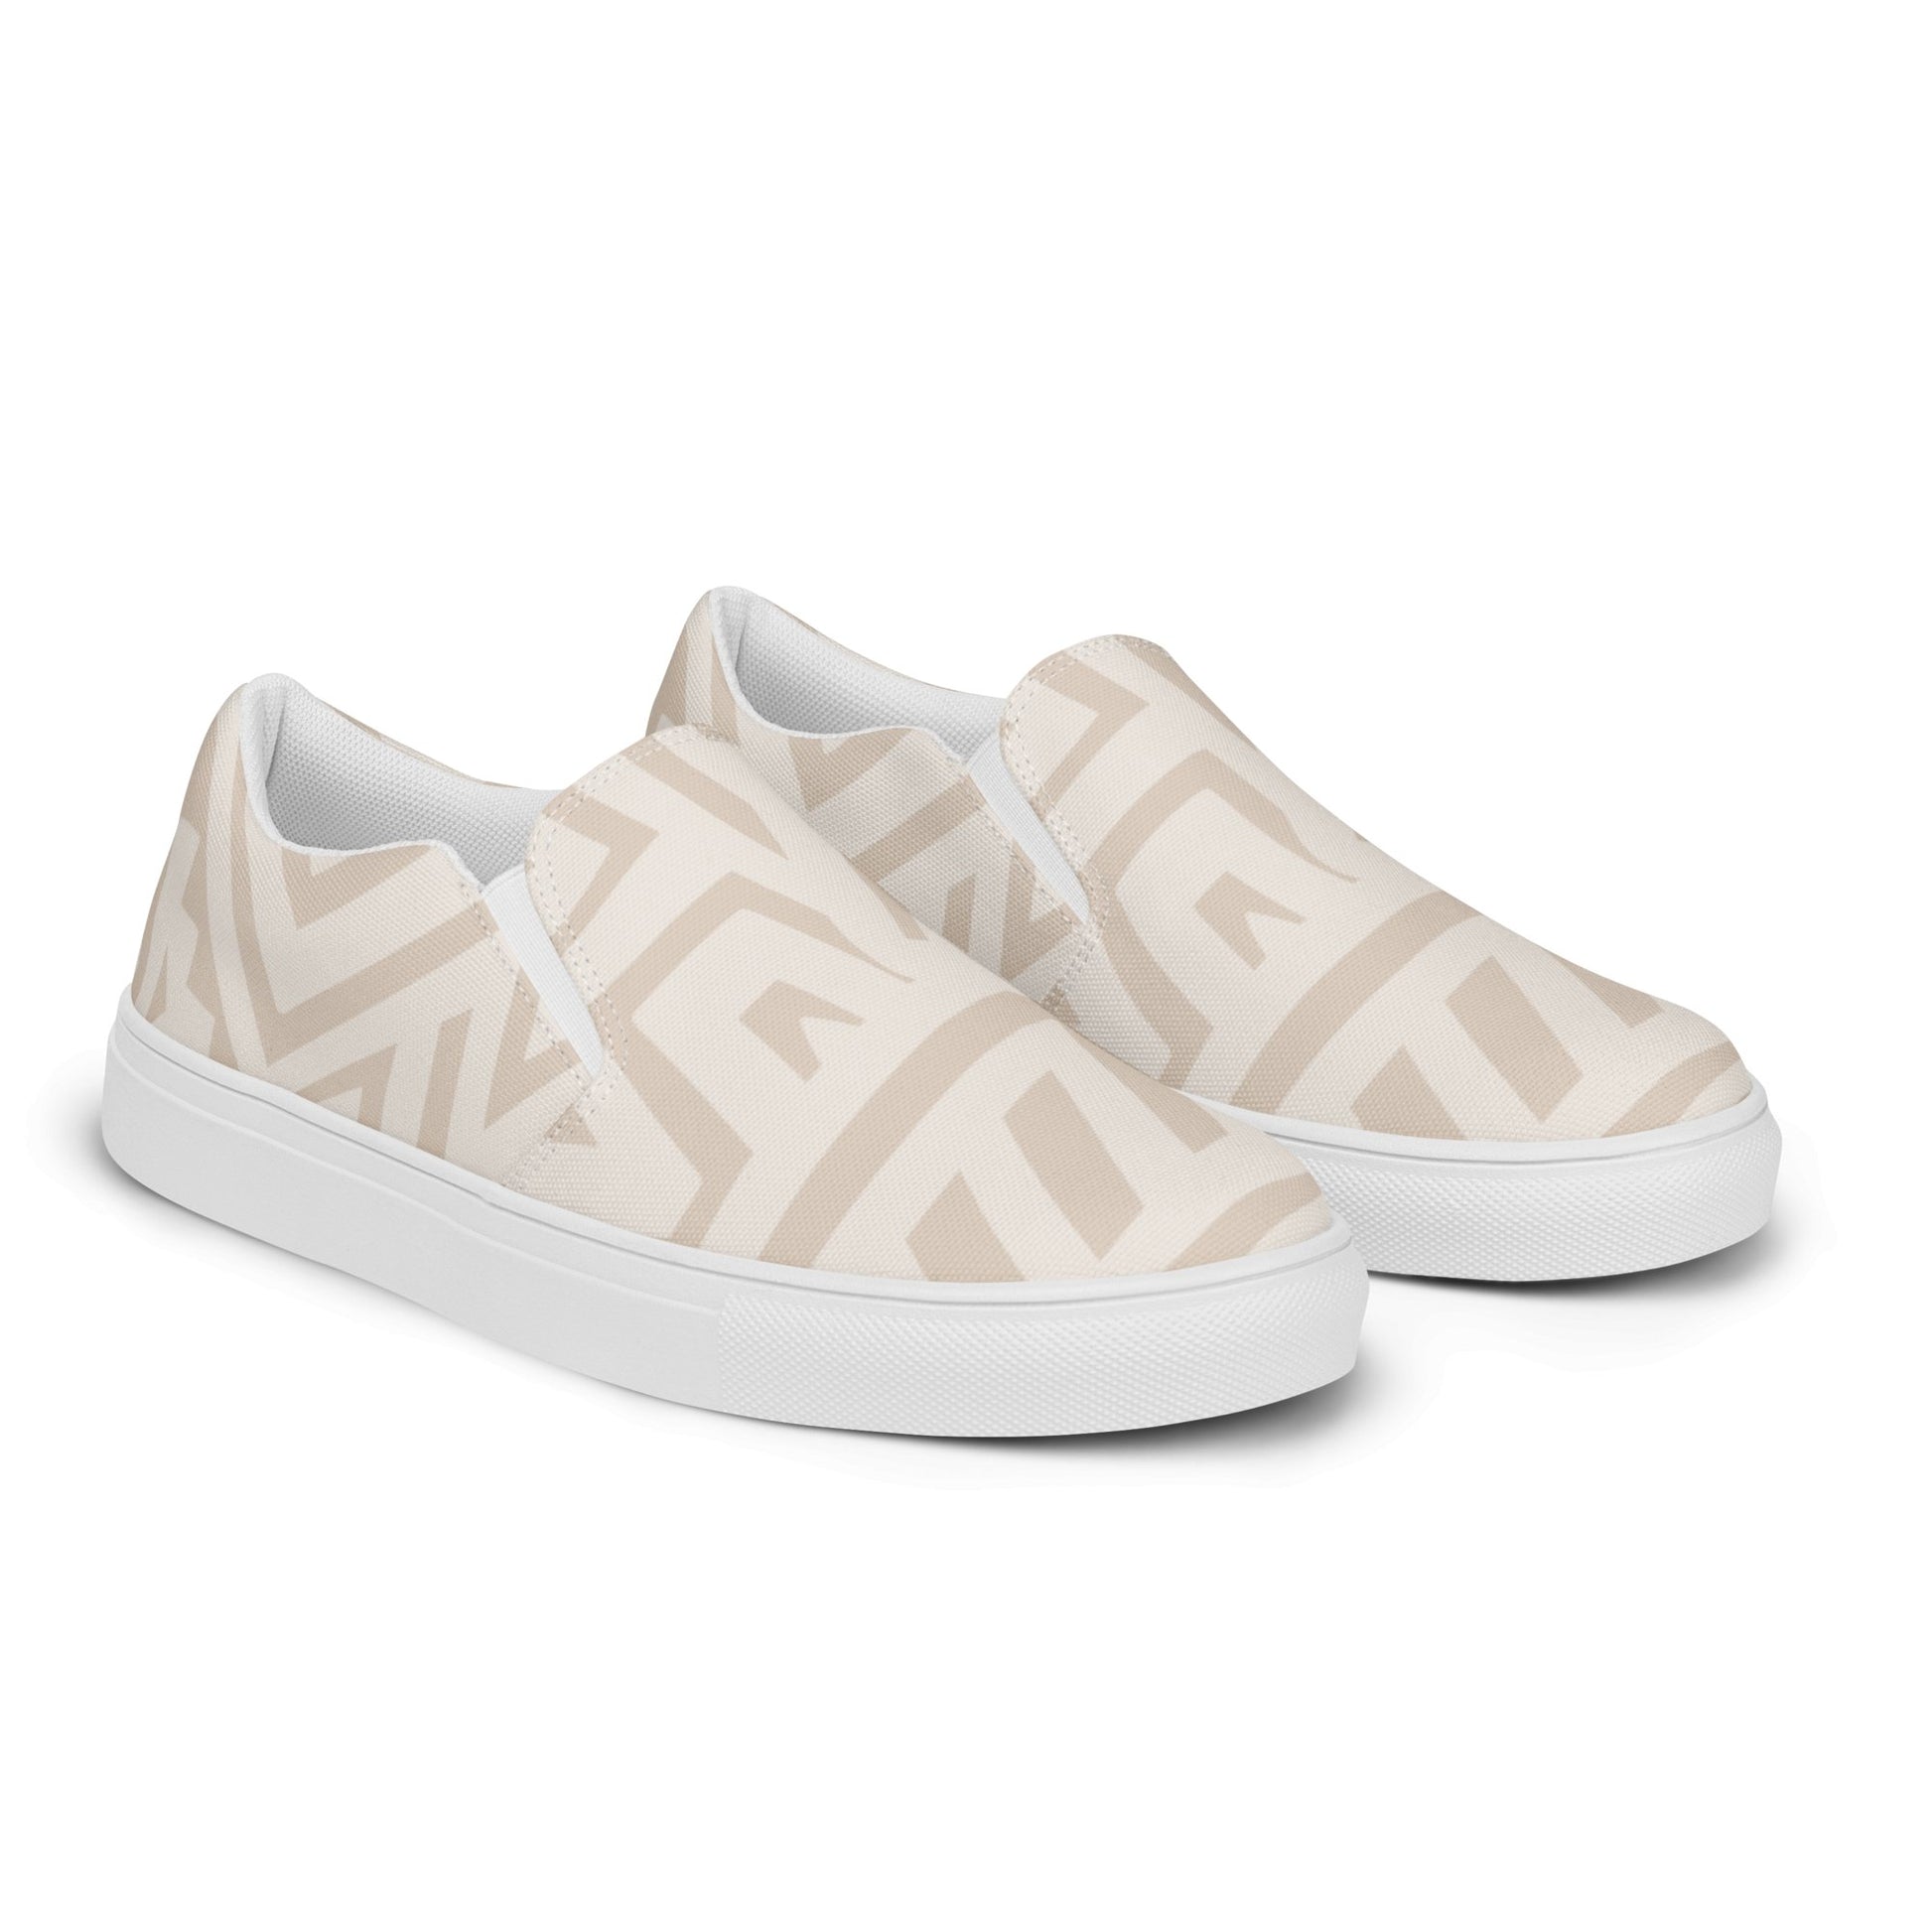 womens-slip-on-canvas-shoes-ethnic-style-pink-light-pink